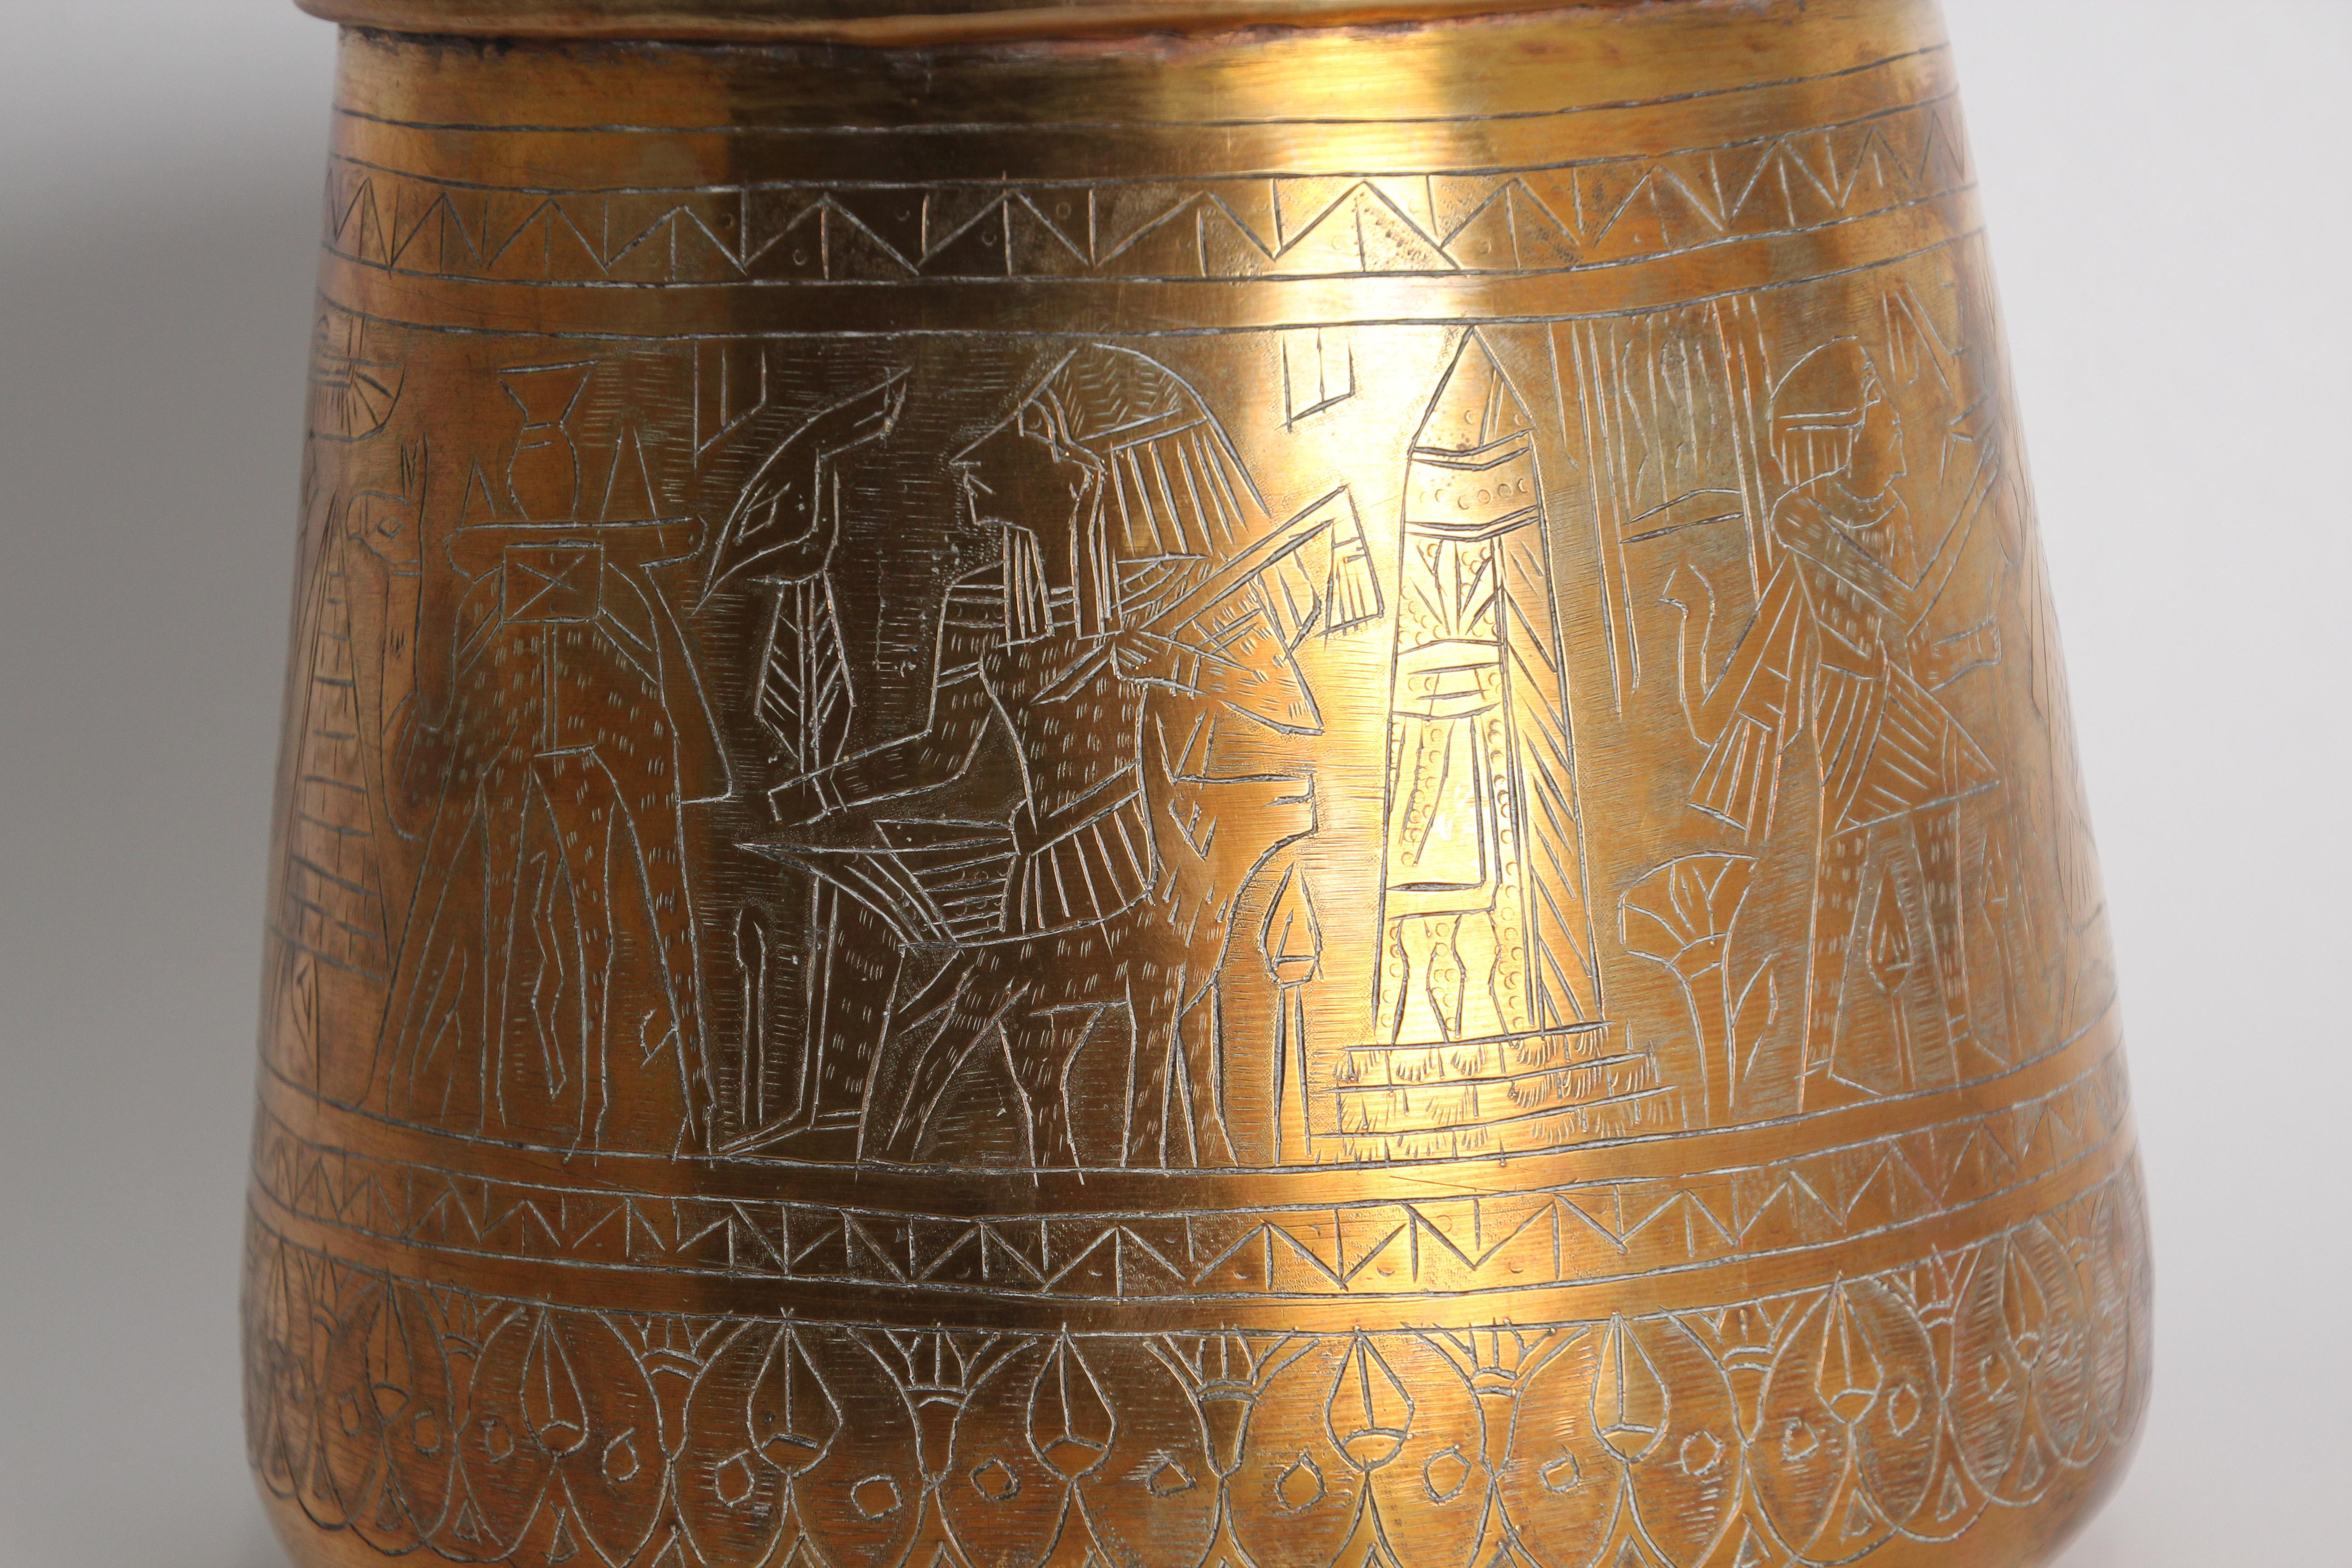 Middle Eastern Egyptian hand etched polished brass vessel.
Could be used as a vase or Jardiniere, indoor or outdoor.
Arabic Mameluke revival style brass vessel with figural scenes and pyramid architectural and geometric designs hand-hammered on